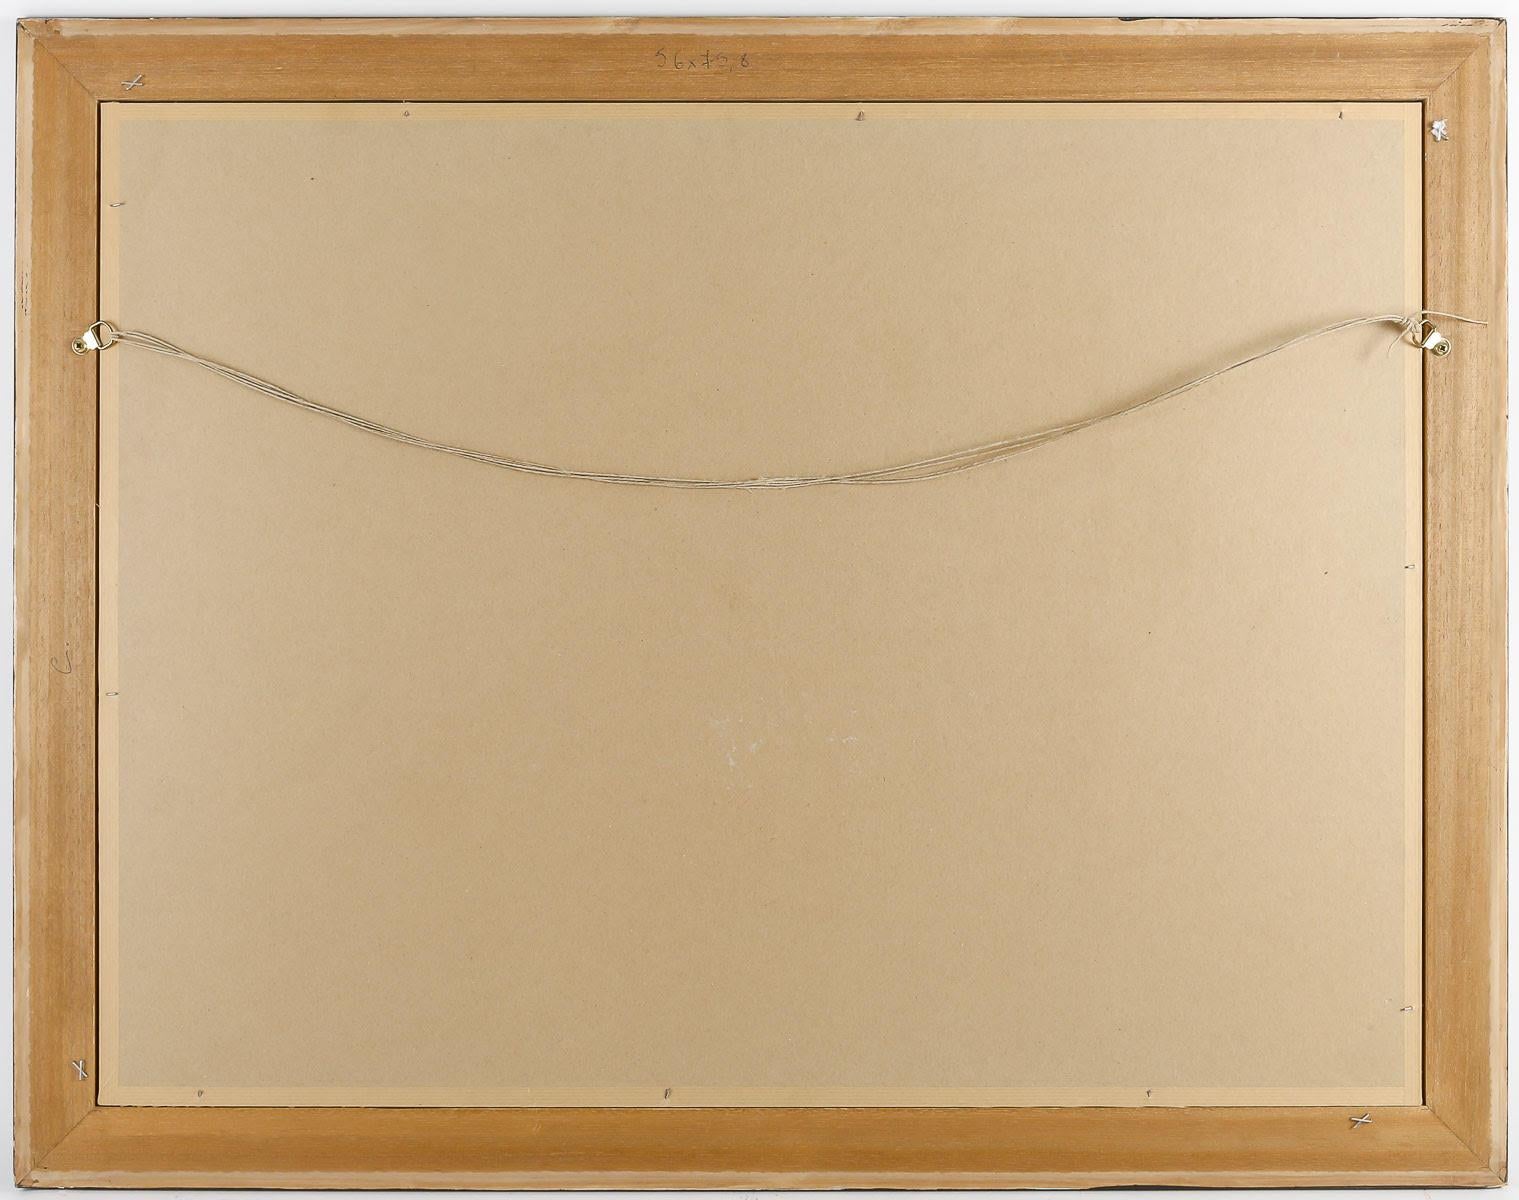 Wood Framed Drawing by Corneille, 20th Century.